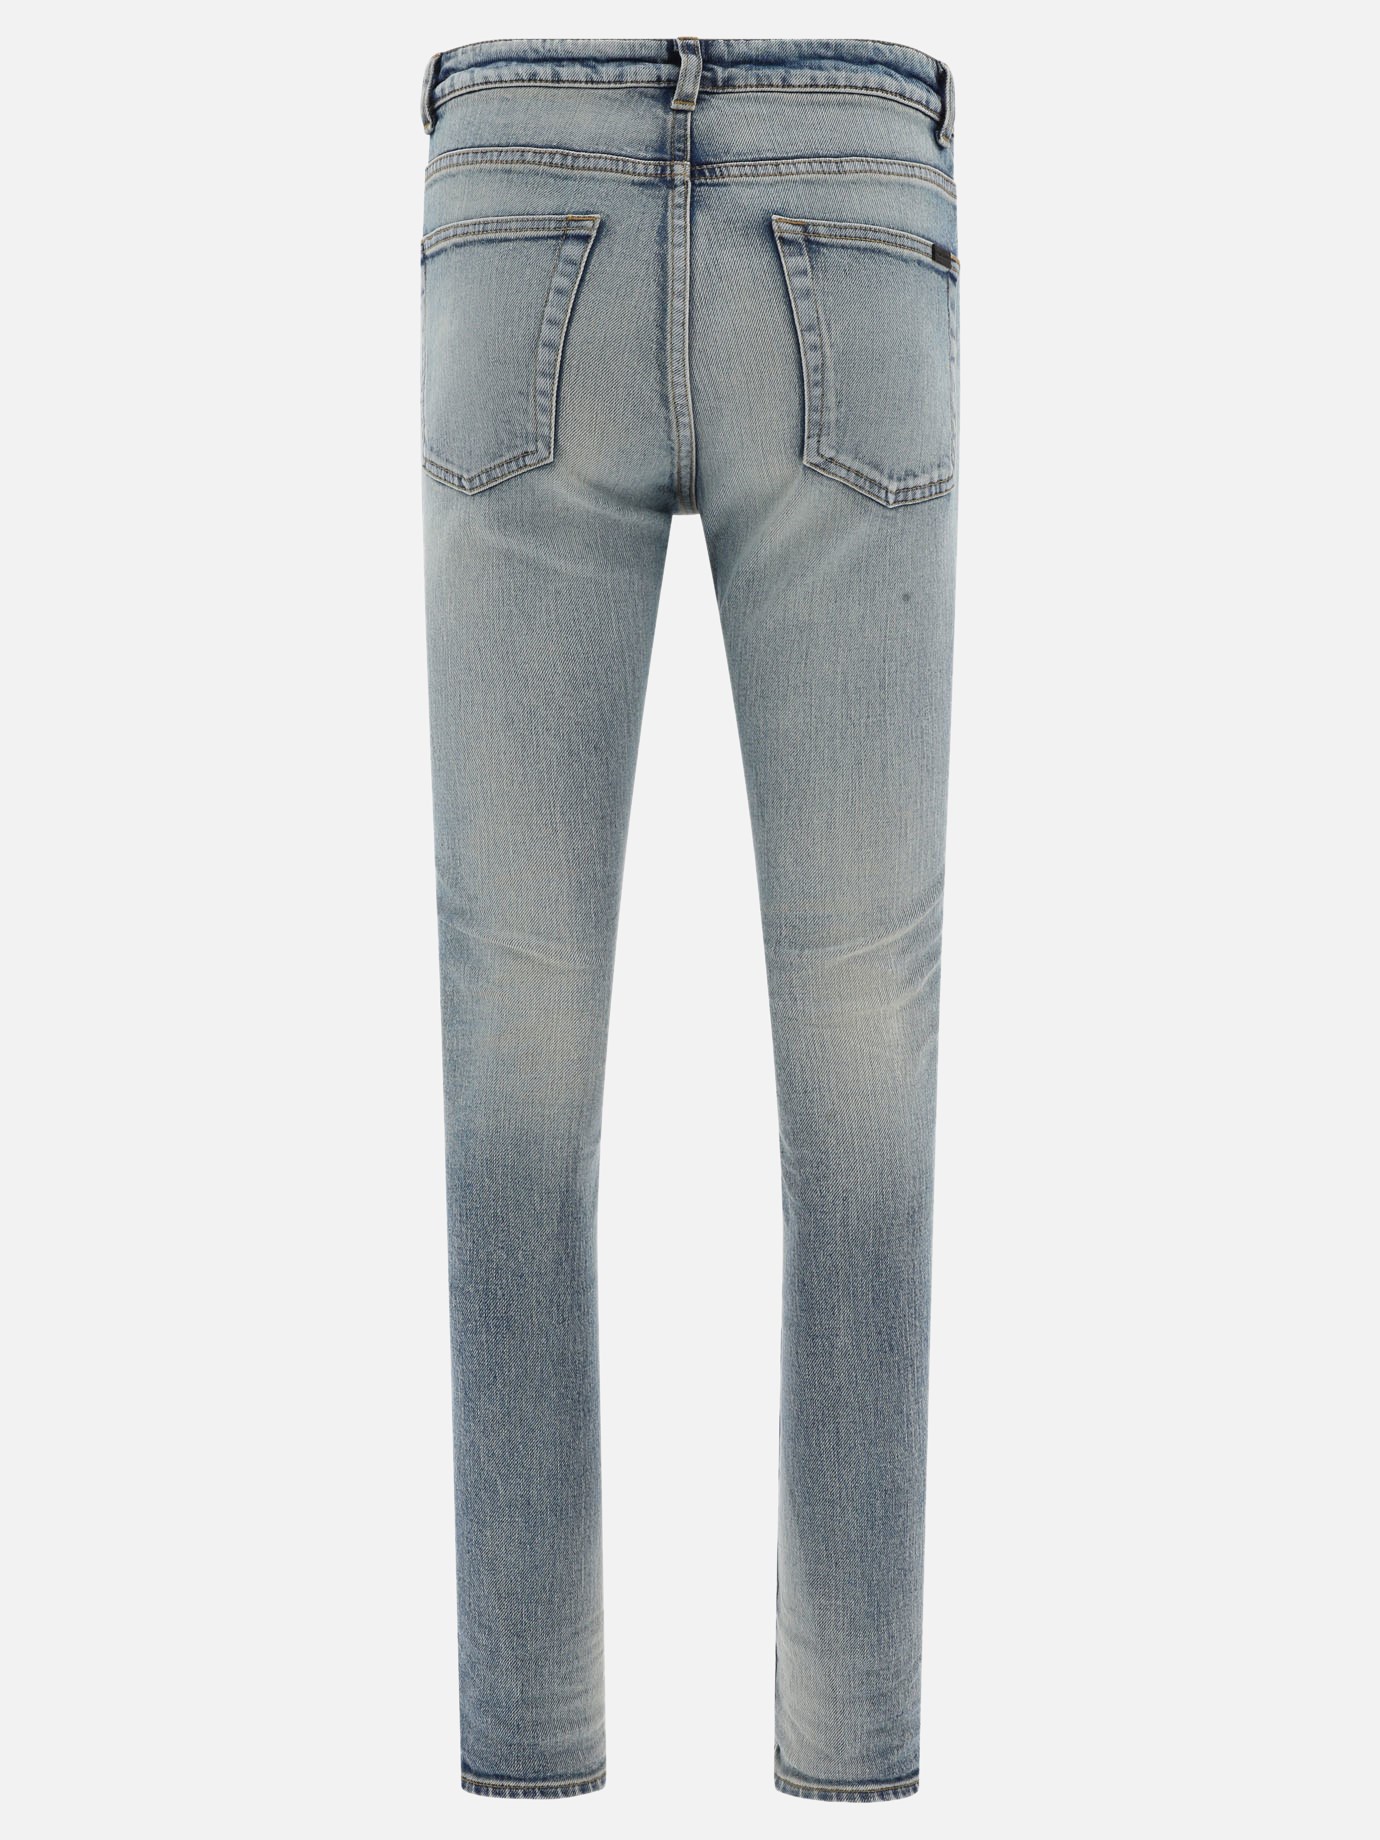 Washed out jeans by Saint Laurent